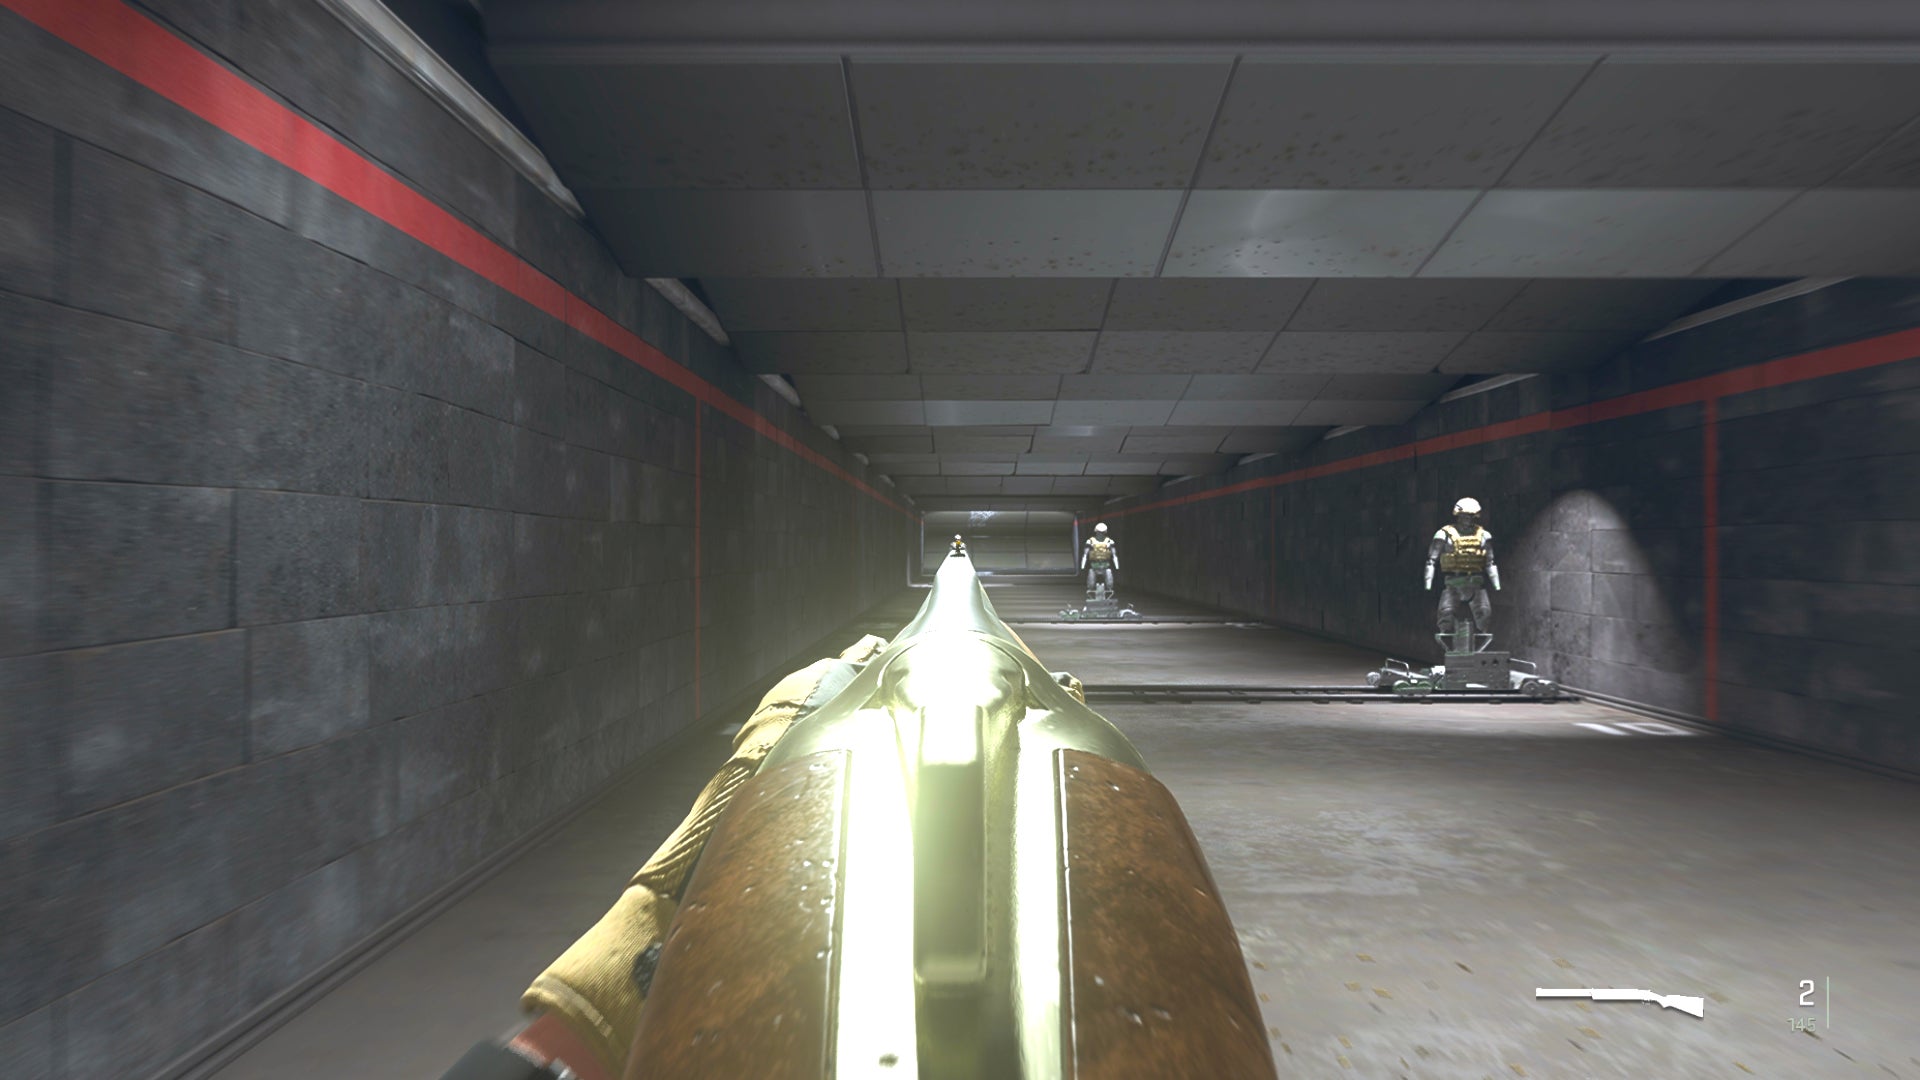 The player in Warzone 2.0 aims at a training dummy with the Lockwood 300 ironsights.